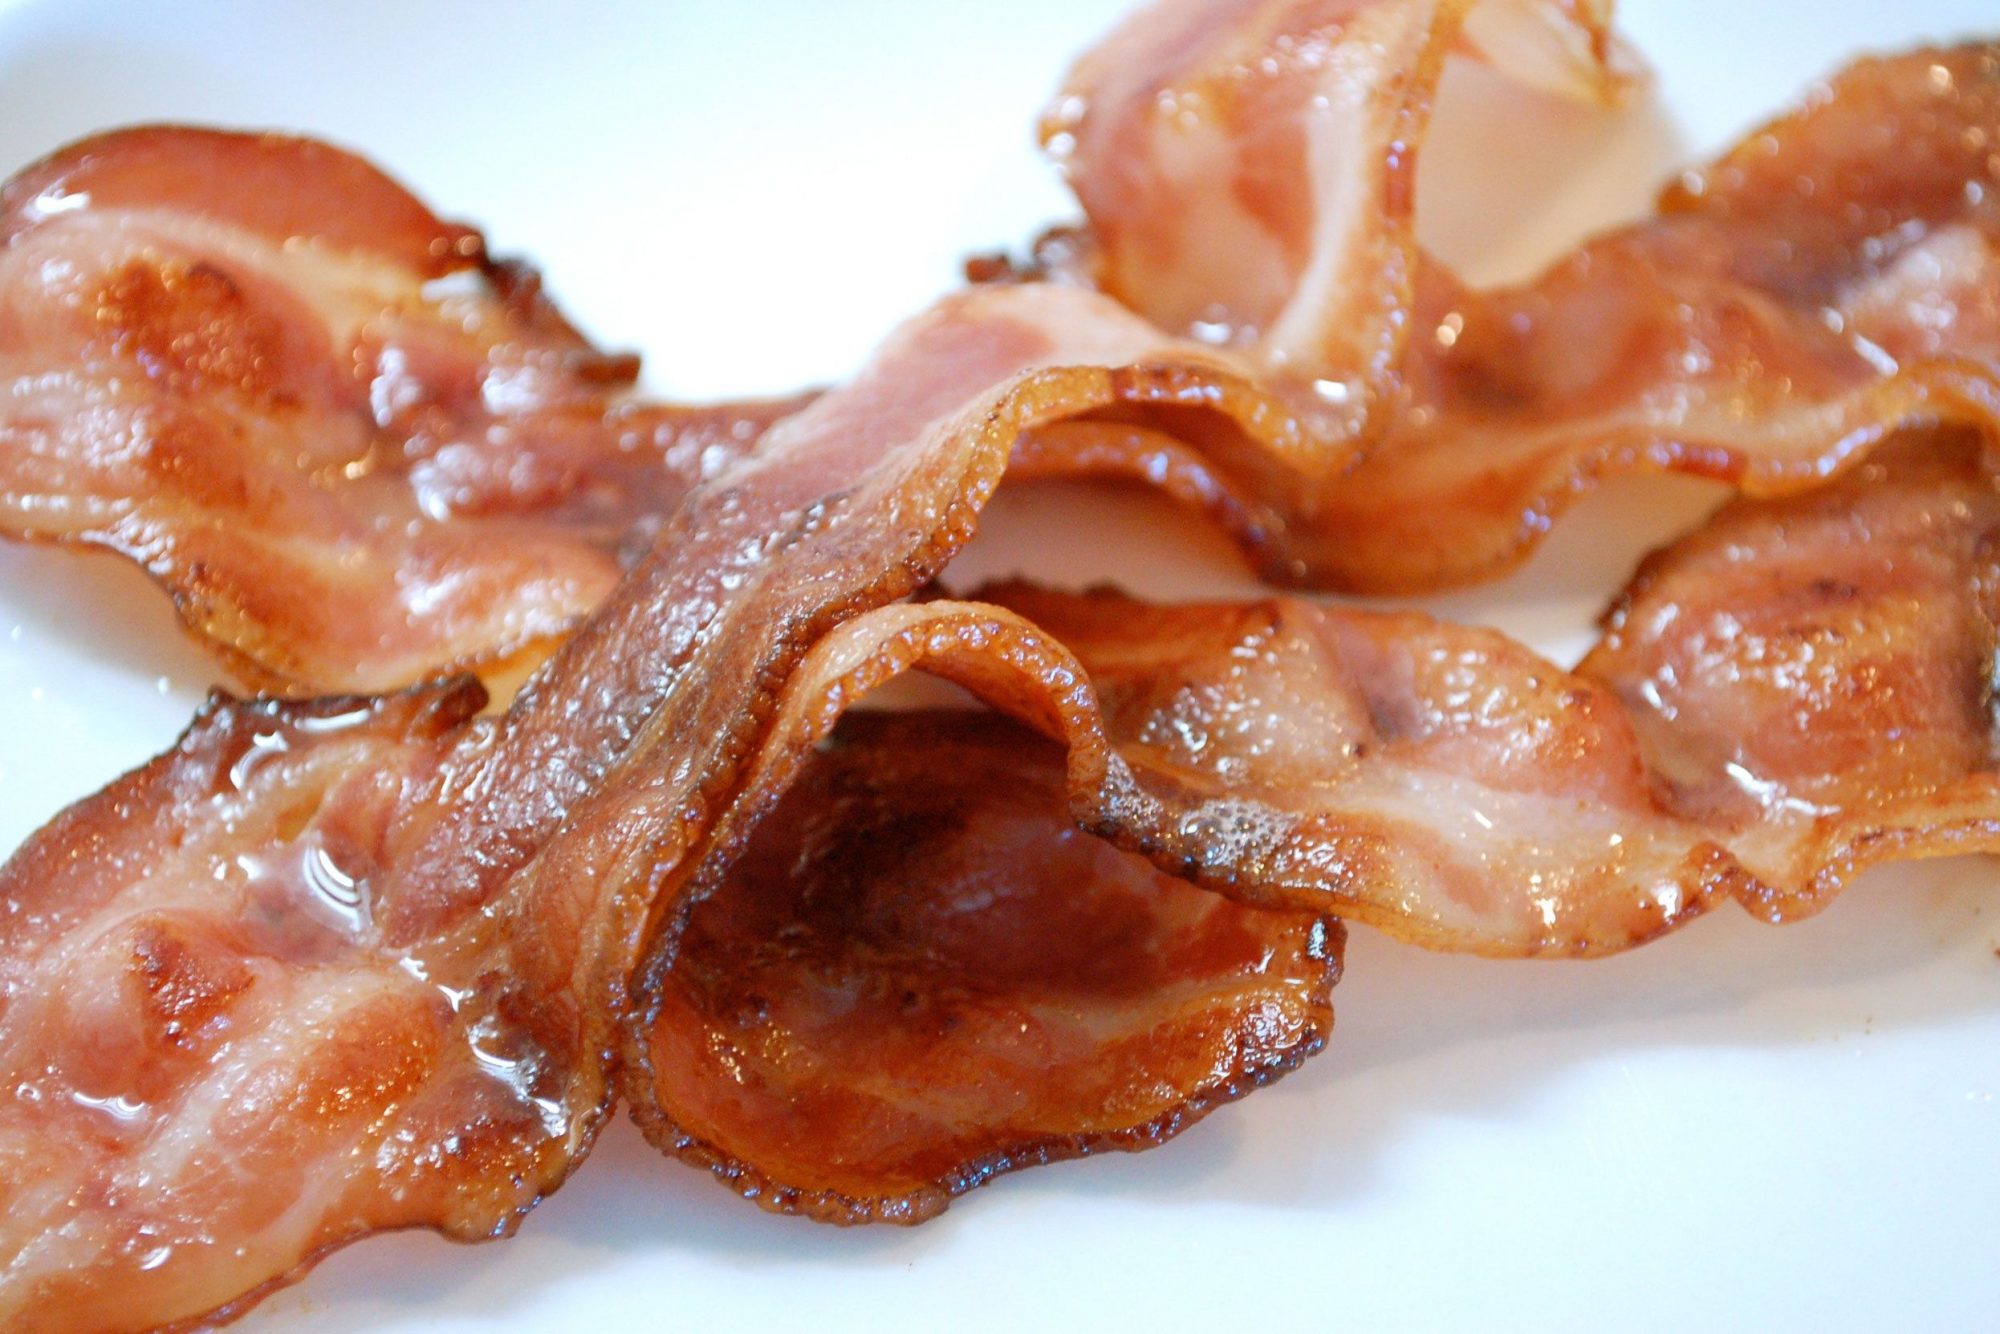 Is Bacon Bad for You, or Good? The Salty, Crunchy Truth